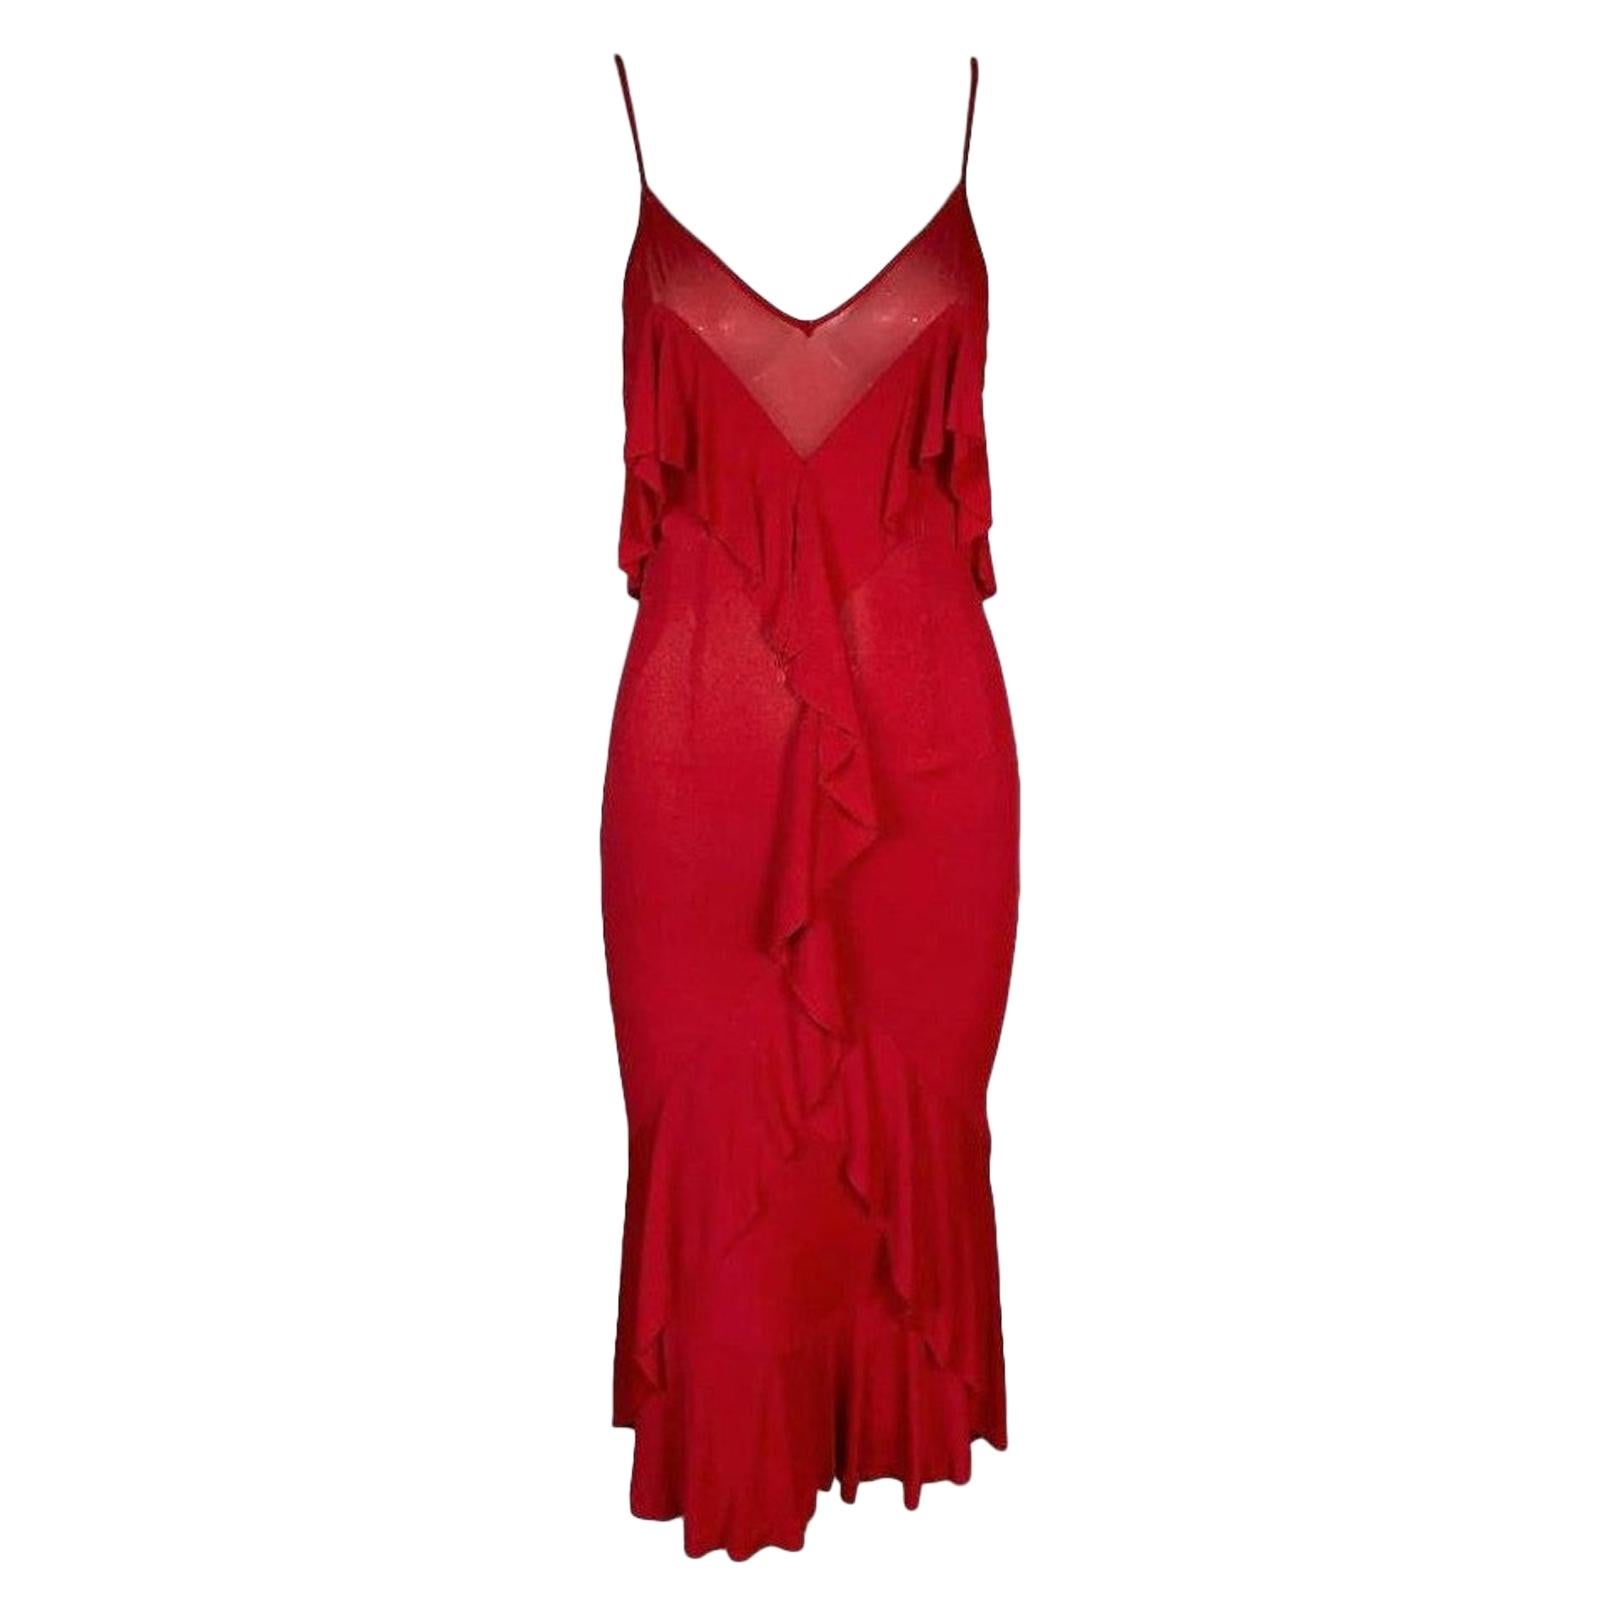 F/W 2003 Yves Saint Laurent Tom Ford Sheer Red Plunging Ruffle Dress L